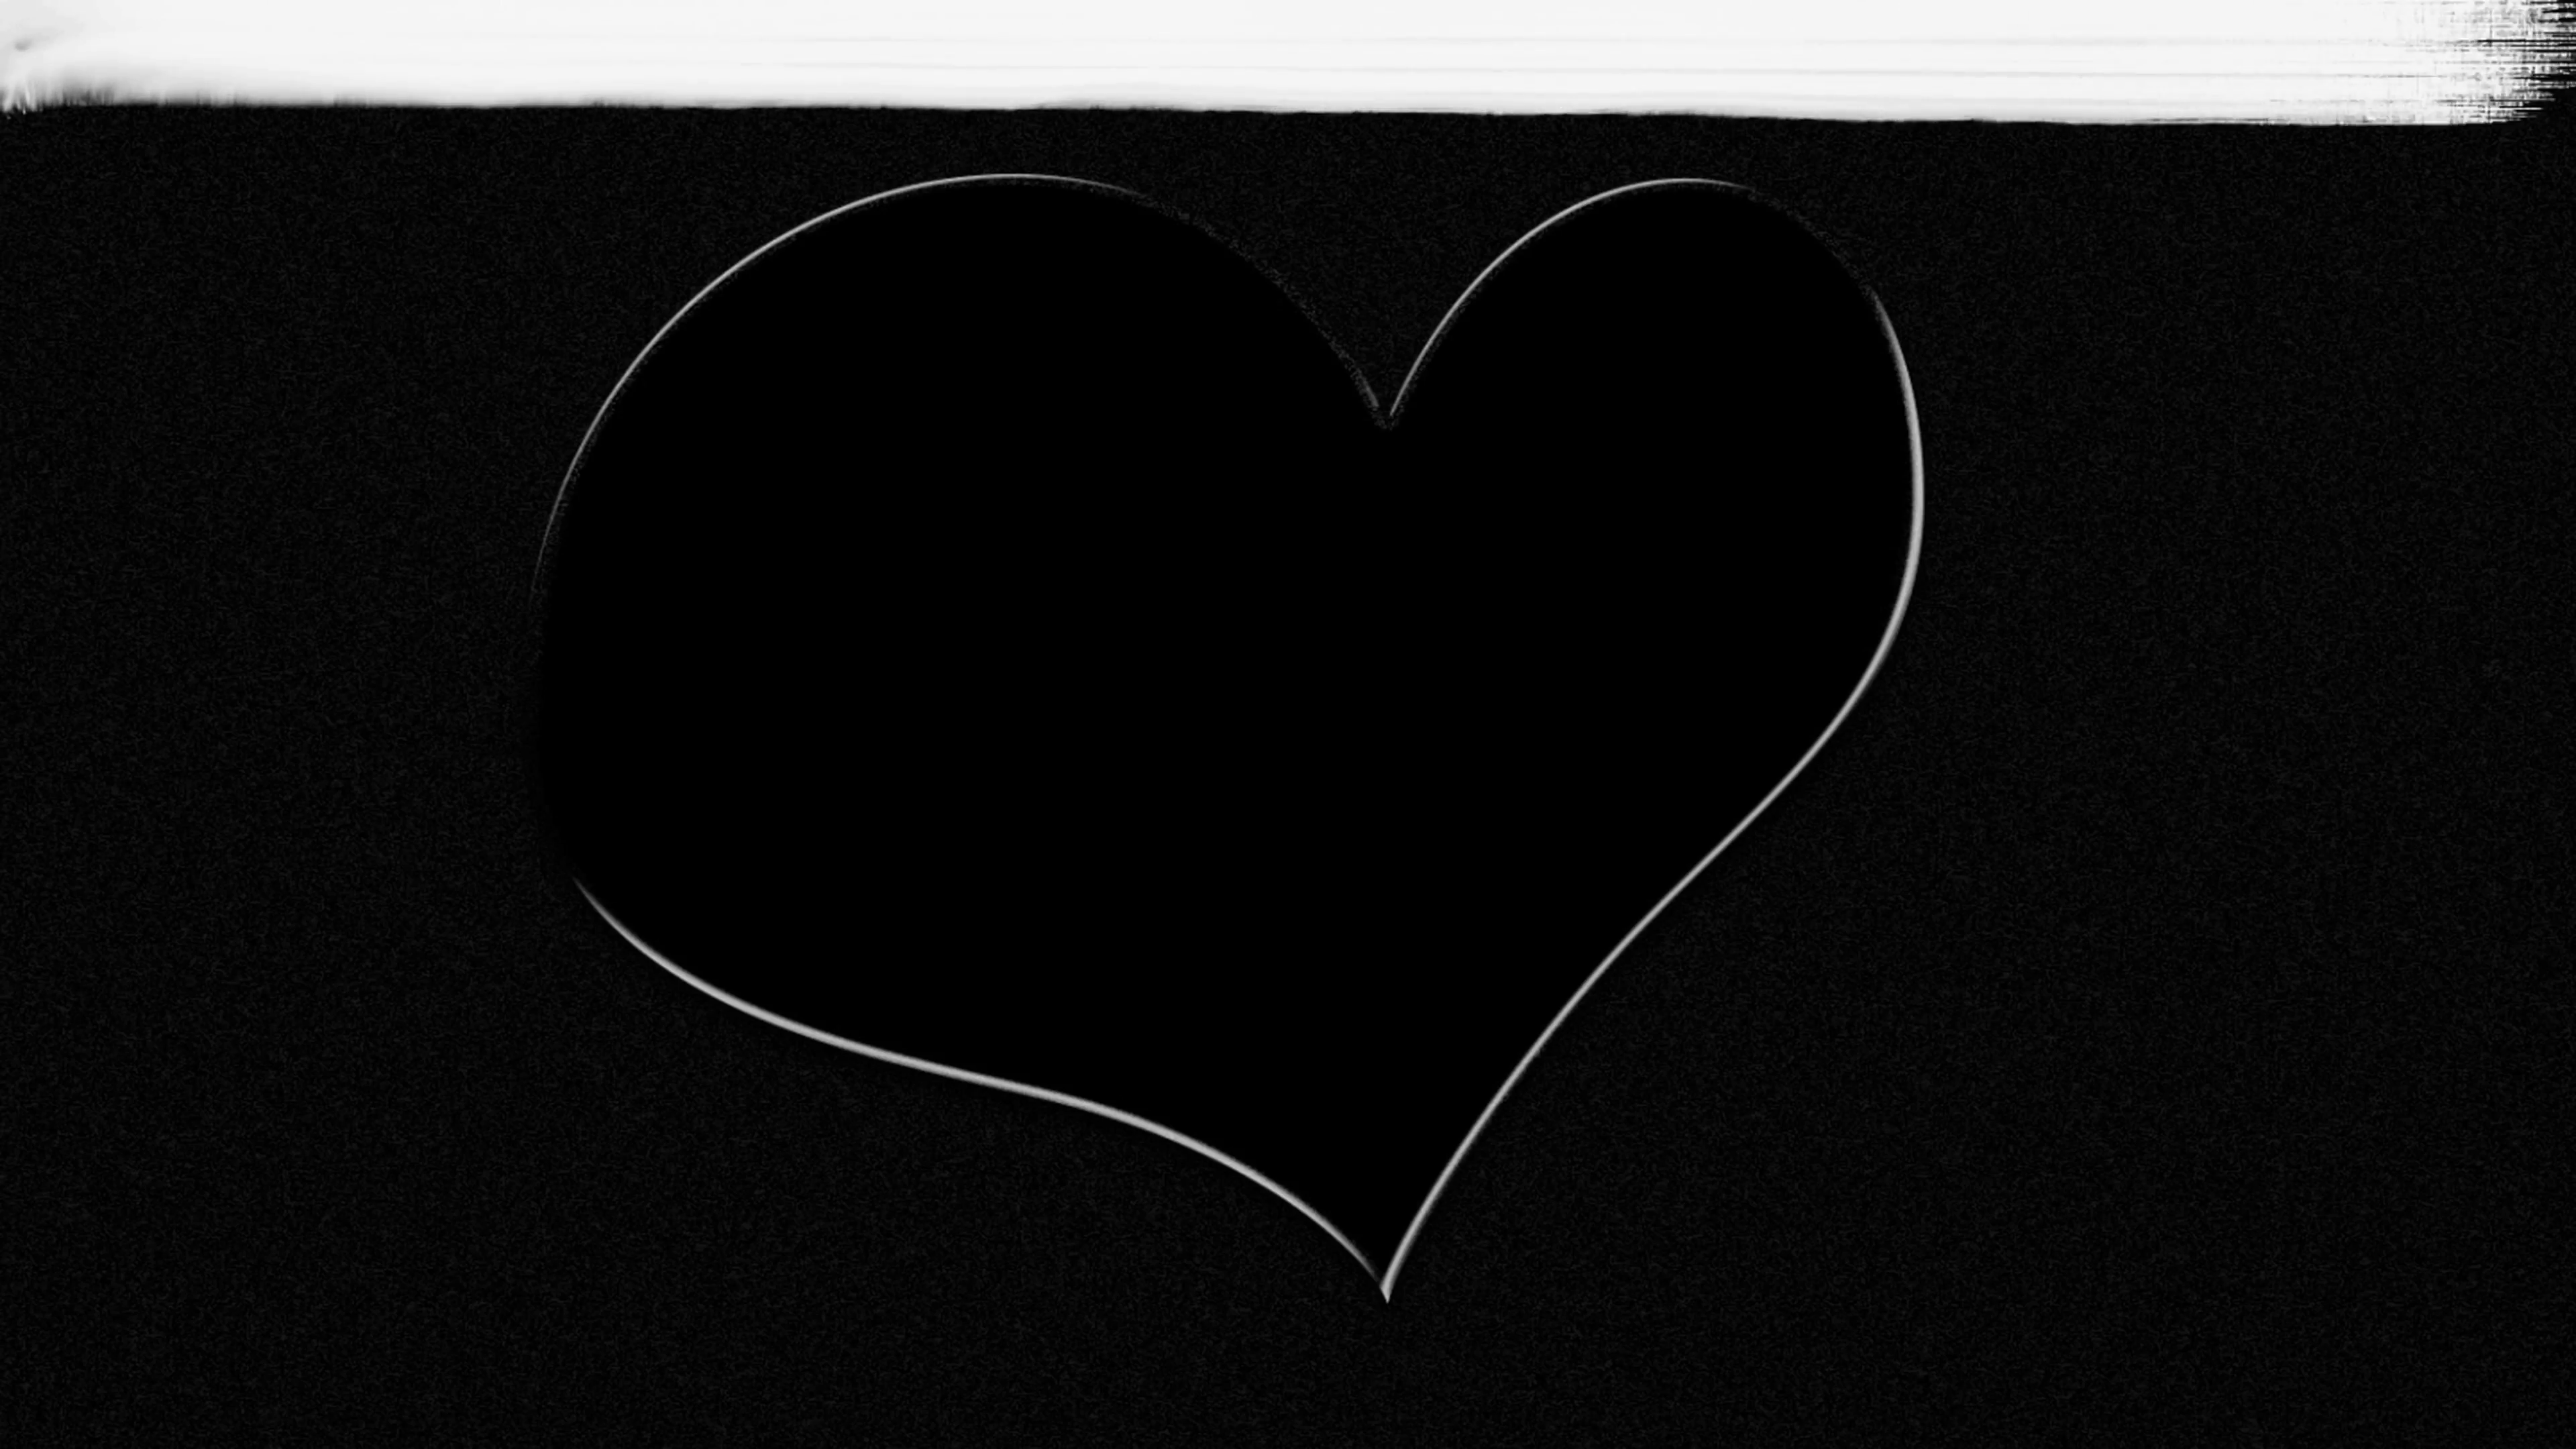 Black And White Hearts Backgrounds - Wallpaper Cave